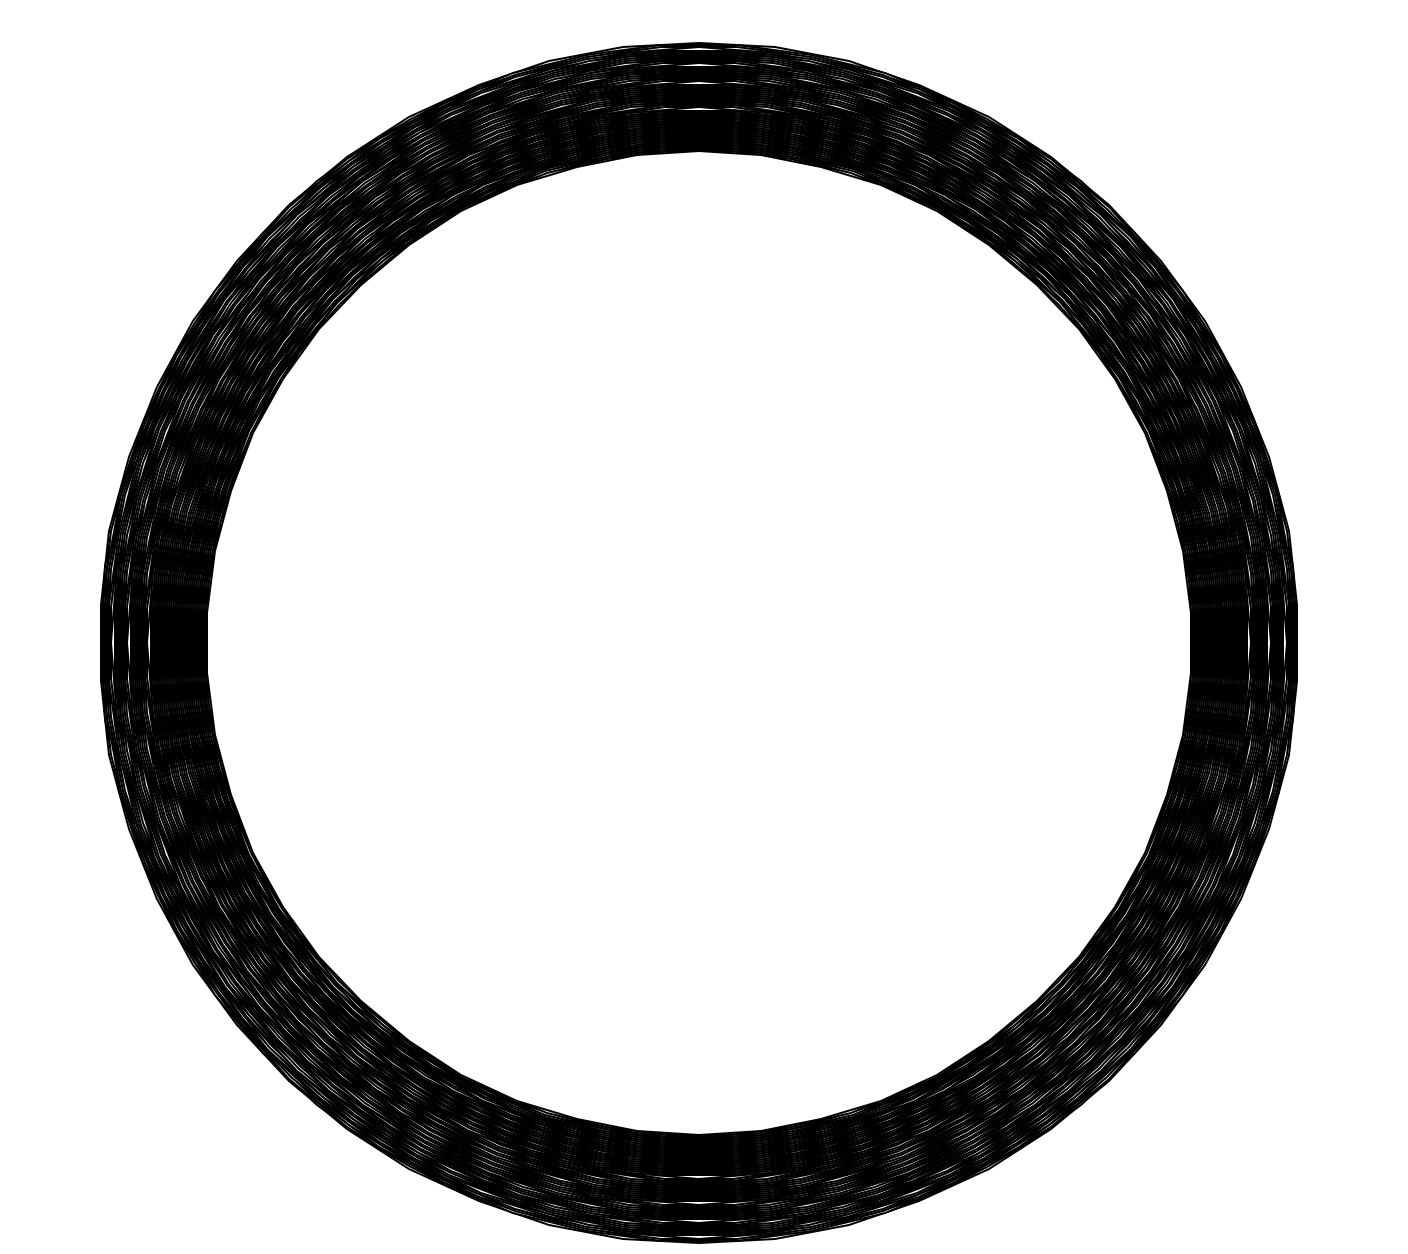 A shape which looks like a thick black outline of a circle (which is actually made up of a many-sided shape).